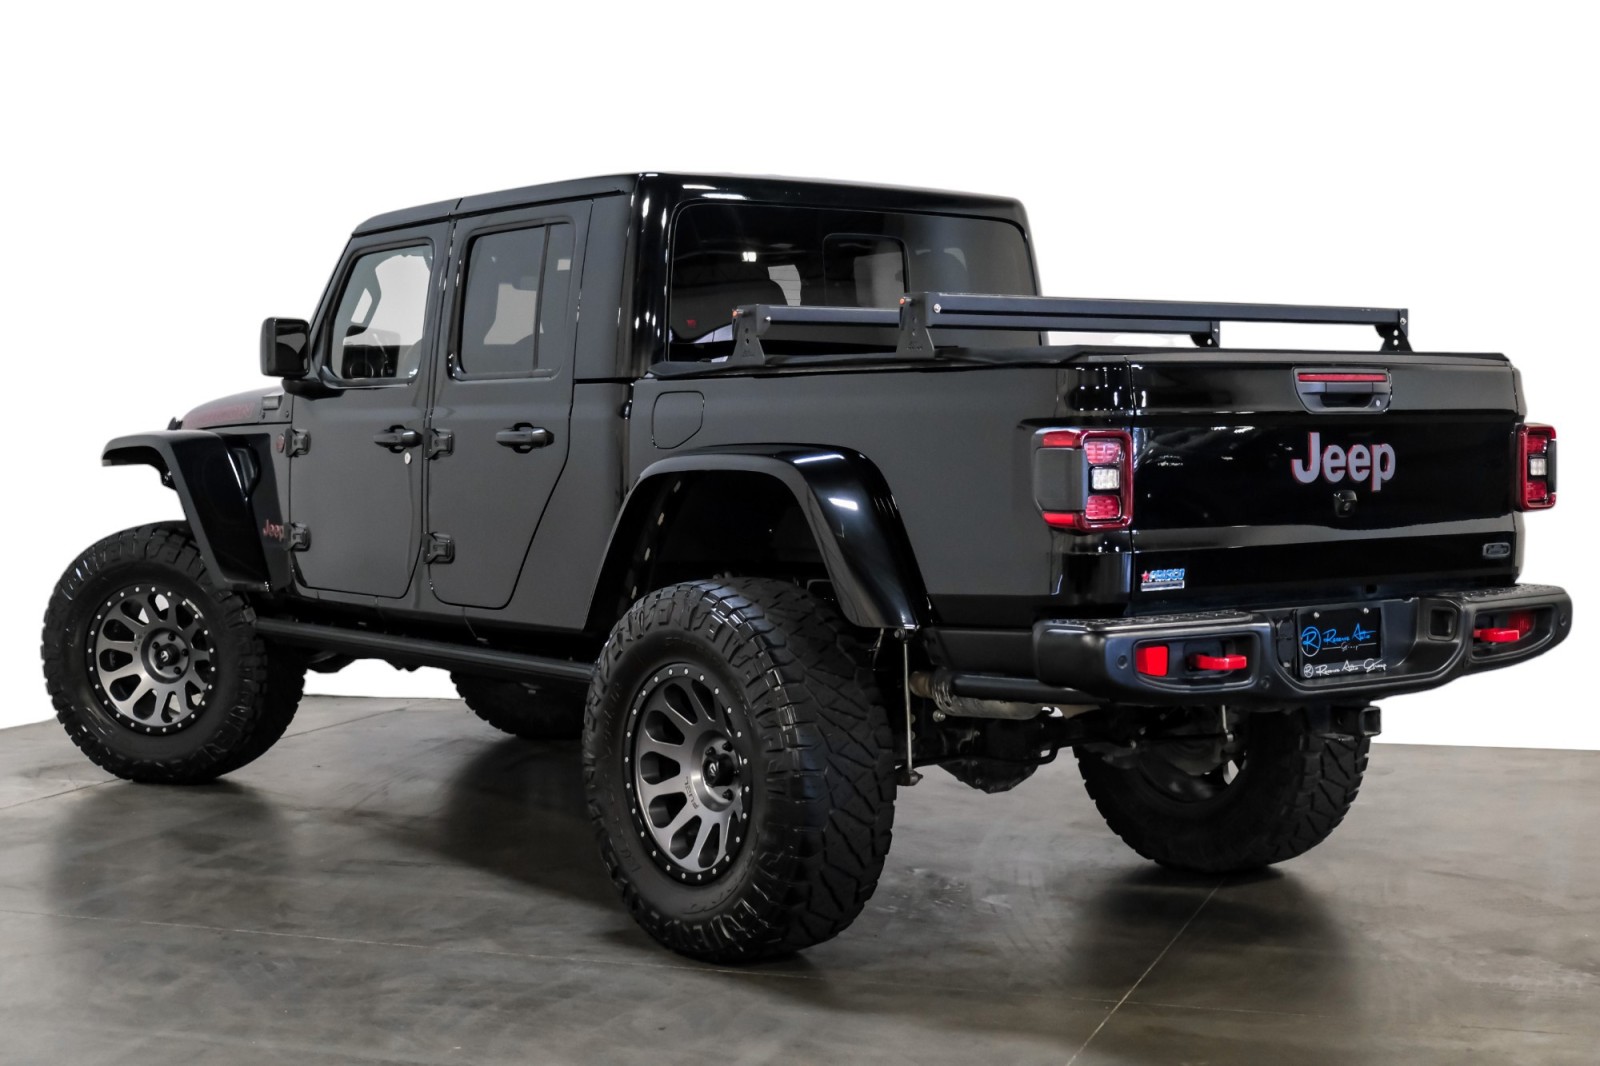 2020 Jeep Gladiator Rubicon 4x4 LaunchEdition 24ZPkg LIFTED CustomBump 8